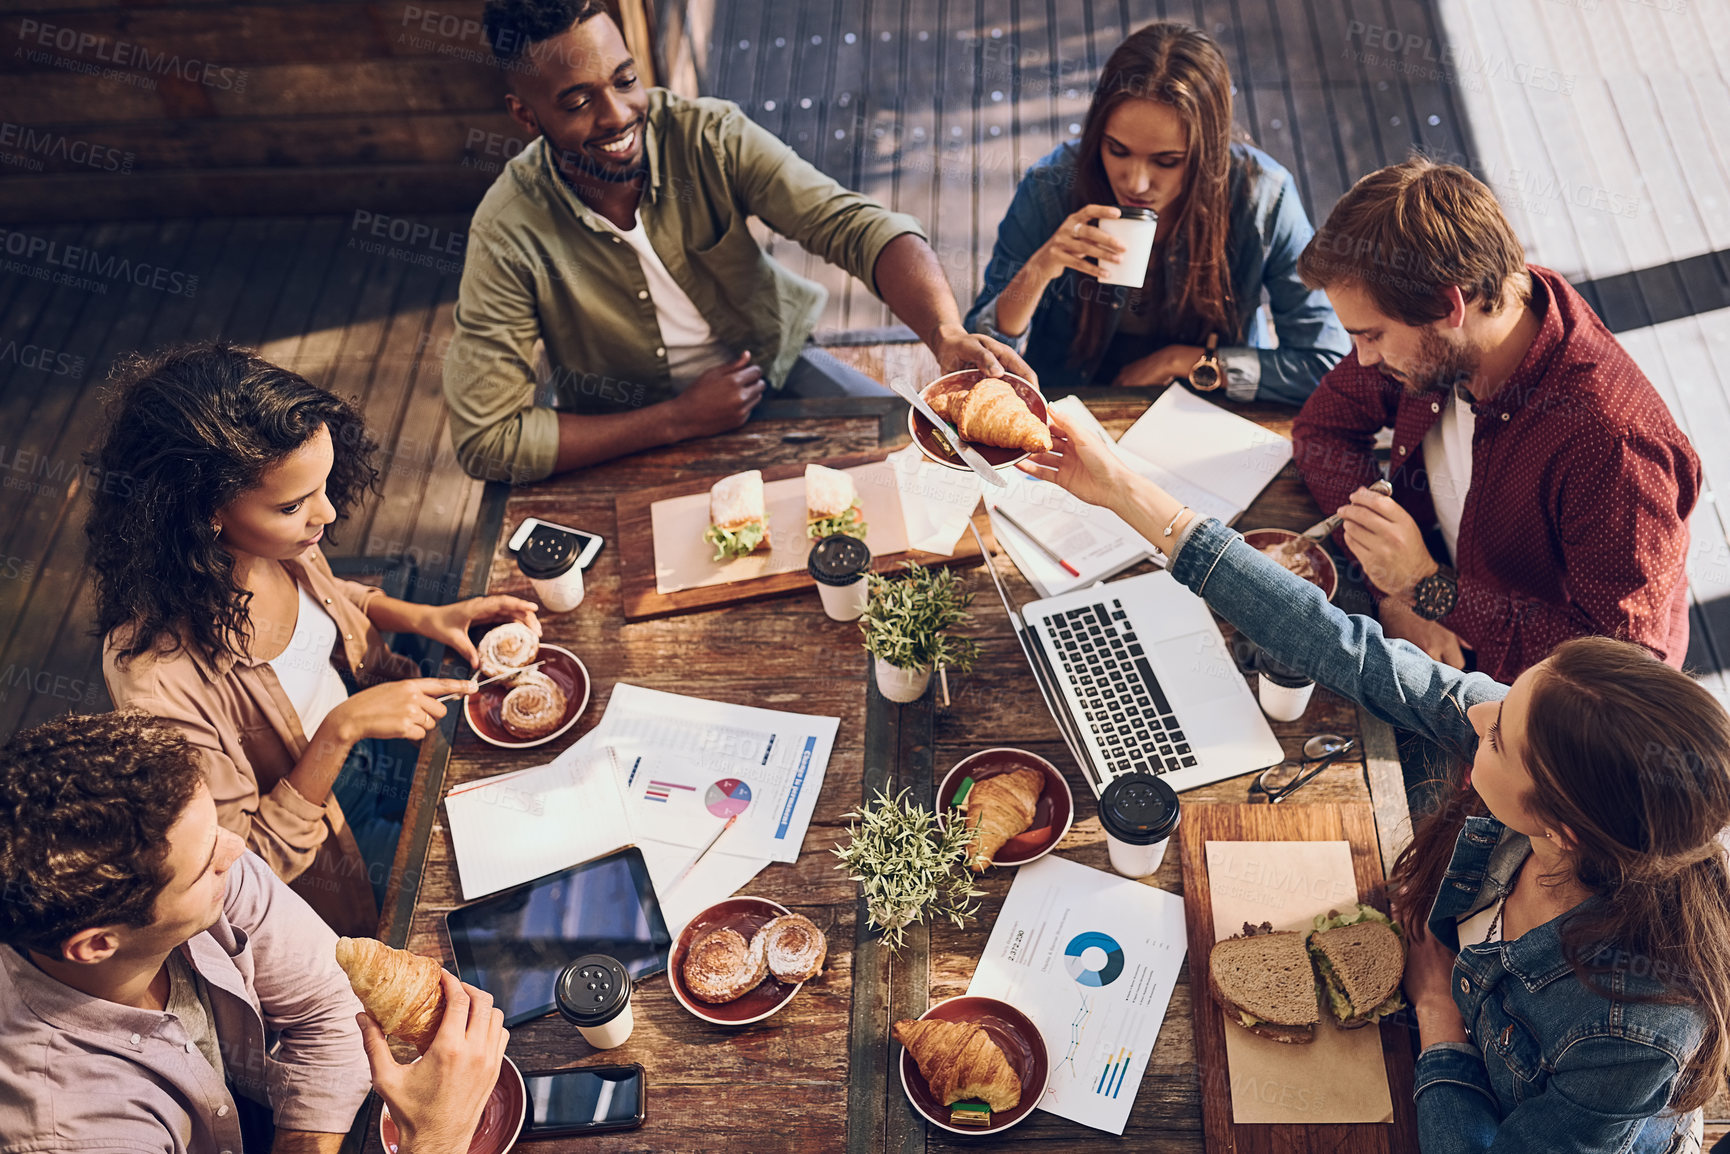 Buy stock photo Shot of a group of creative workers having a meeting over lunch in a cafe